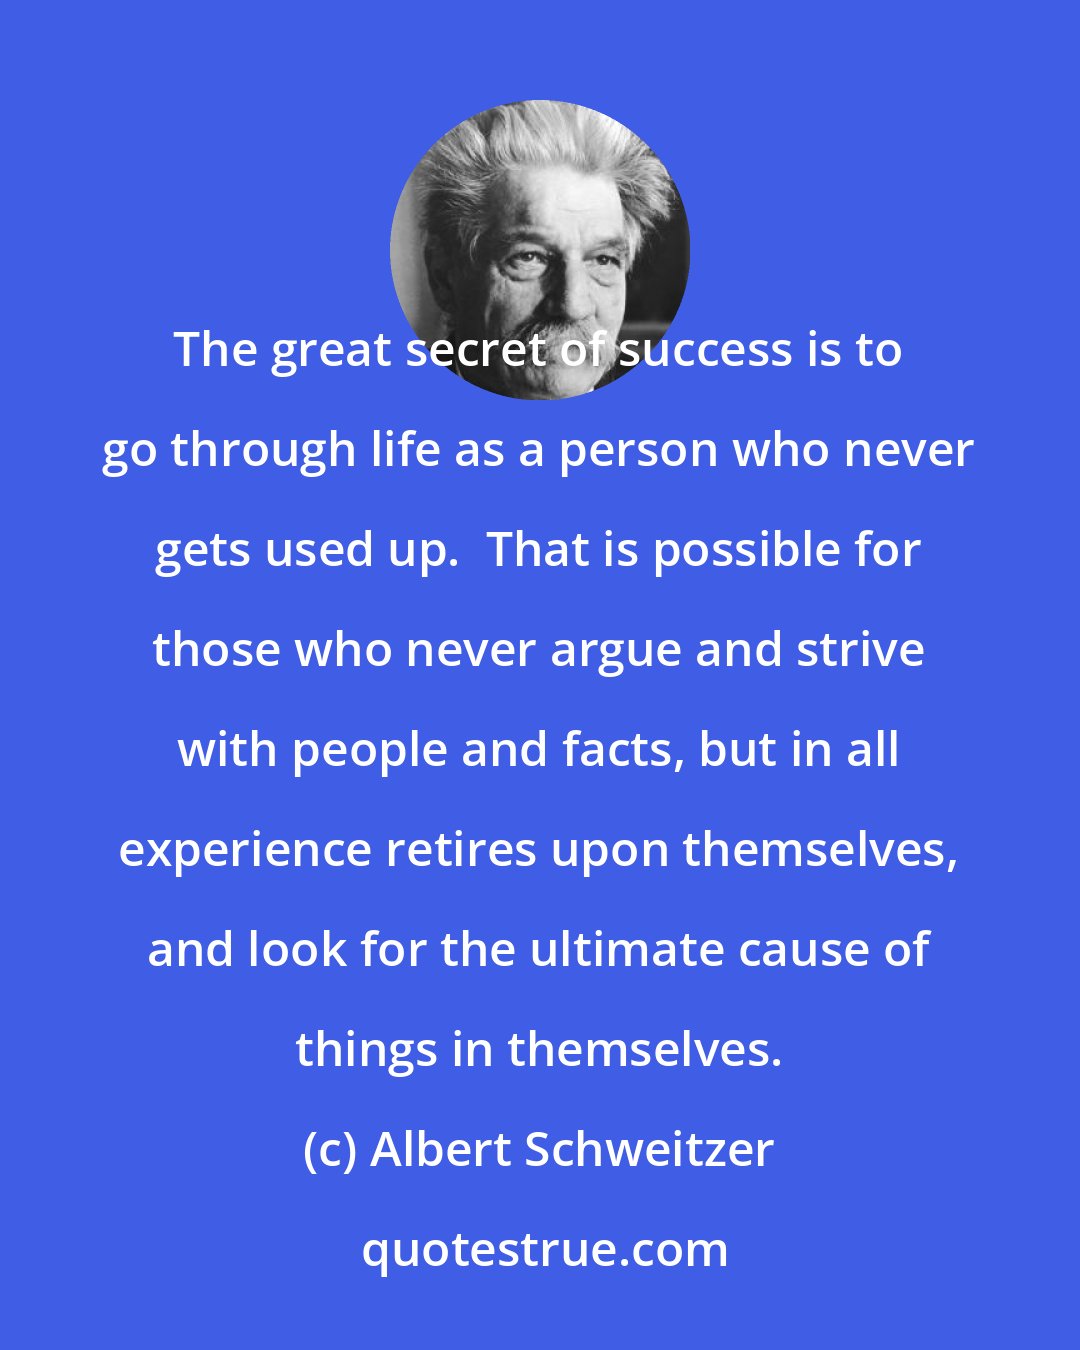 Albert Schweitzer: The great secret of success is to go through life as a person who never gets used up.  That is possible for those who never argue and strive with people and facts, but in all experience retires upon themselves, and look for the ultimate cause of things in themselves.